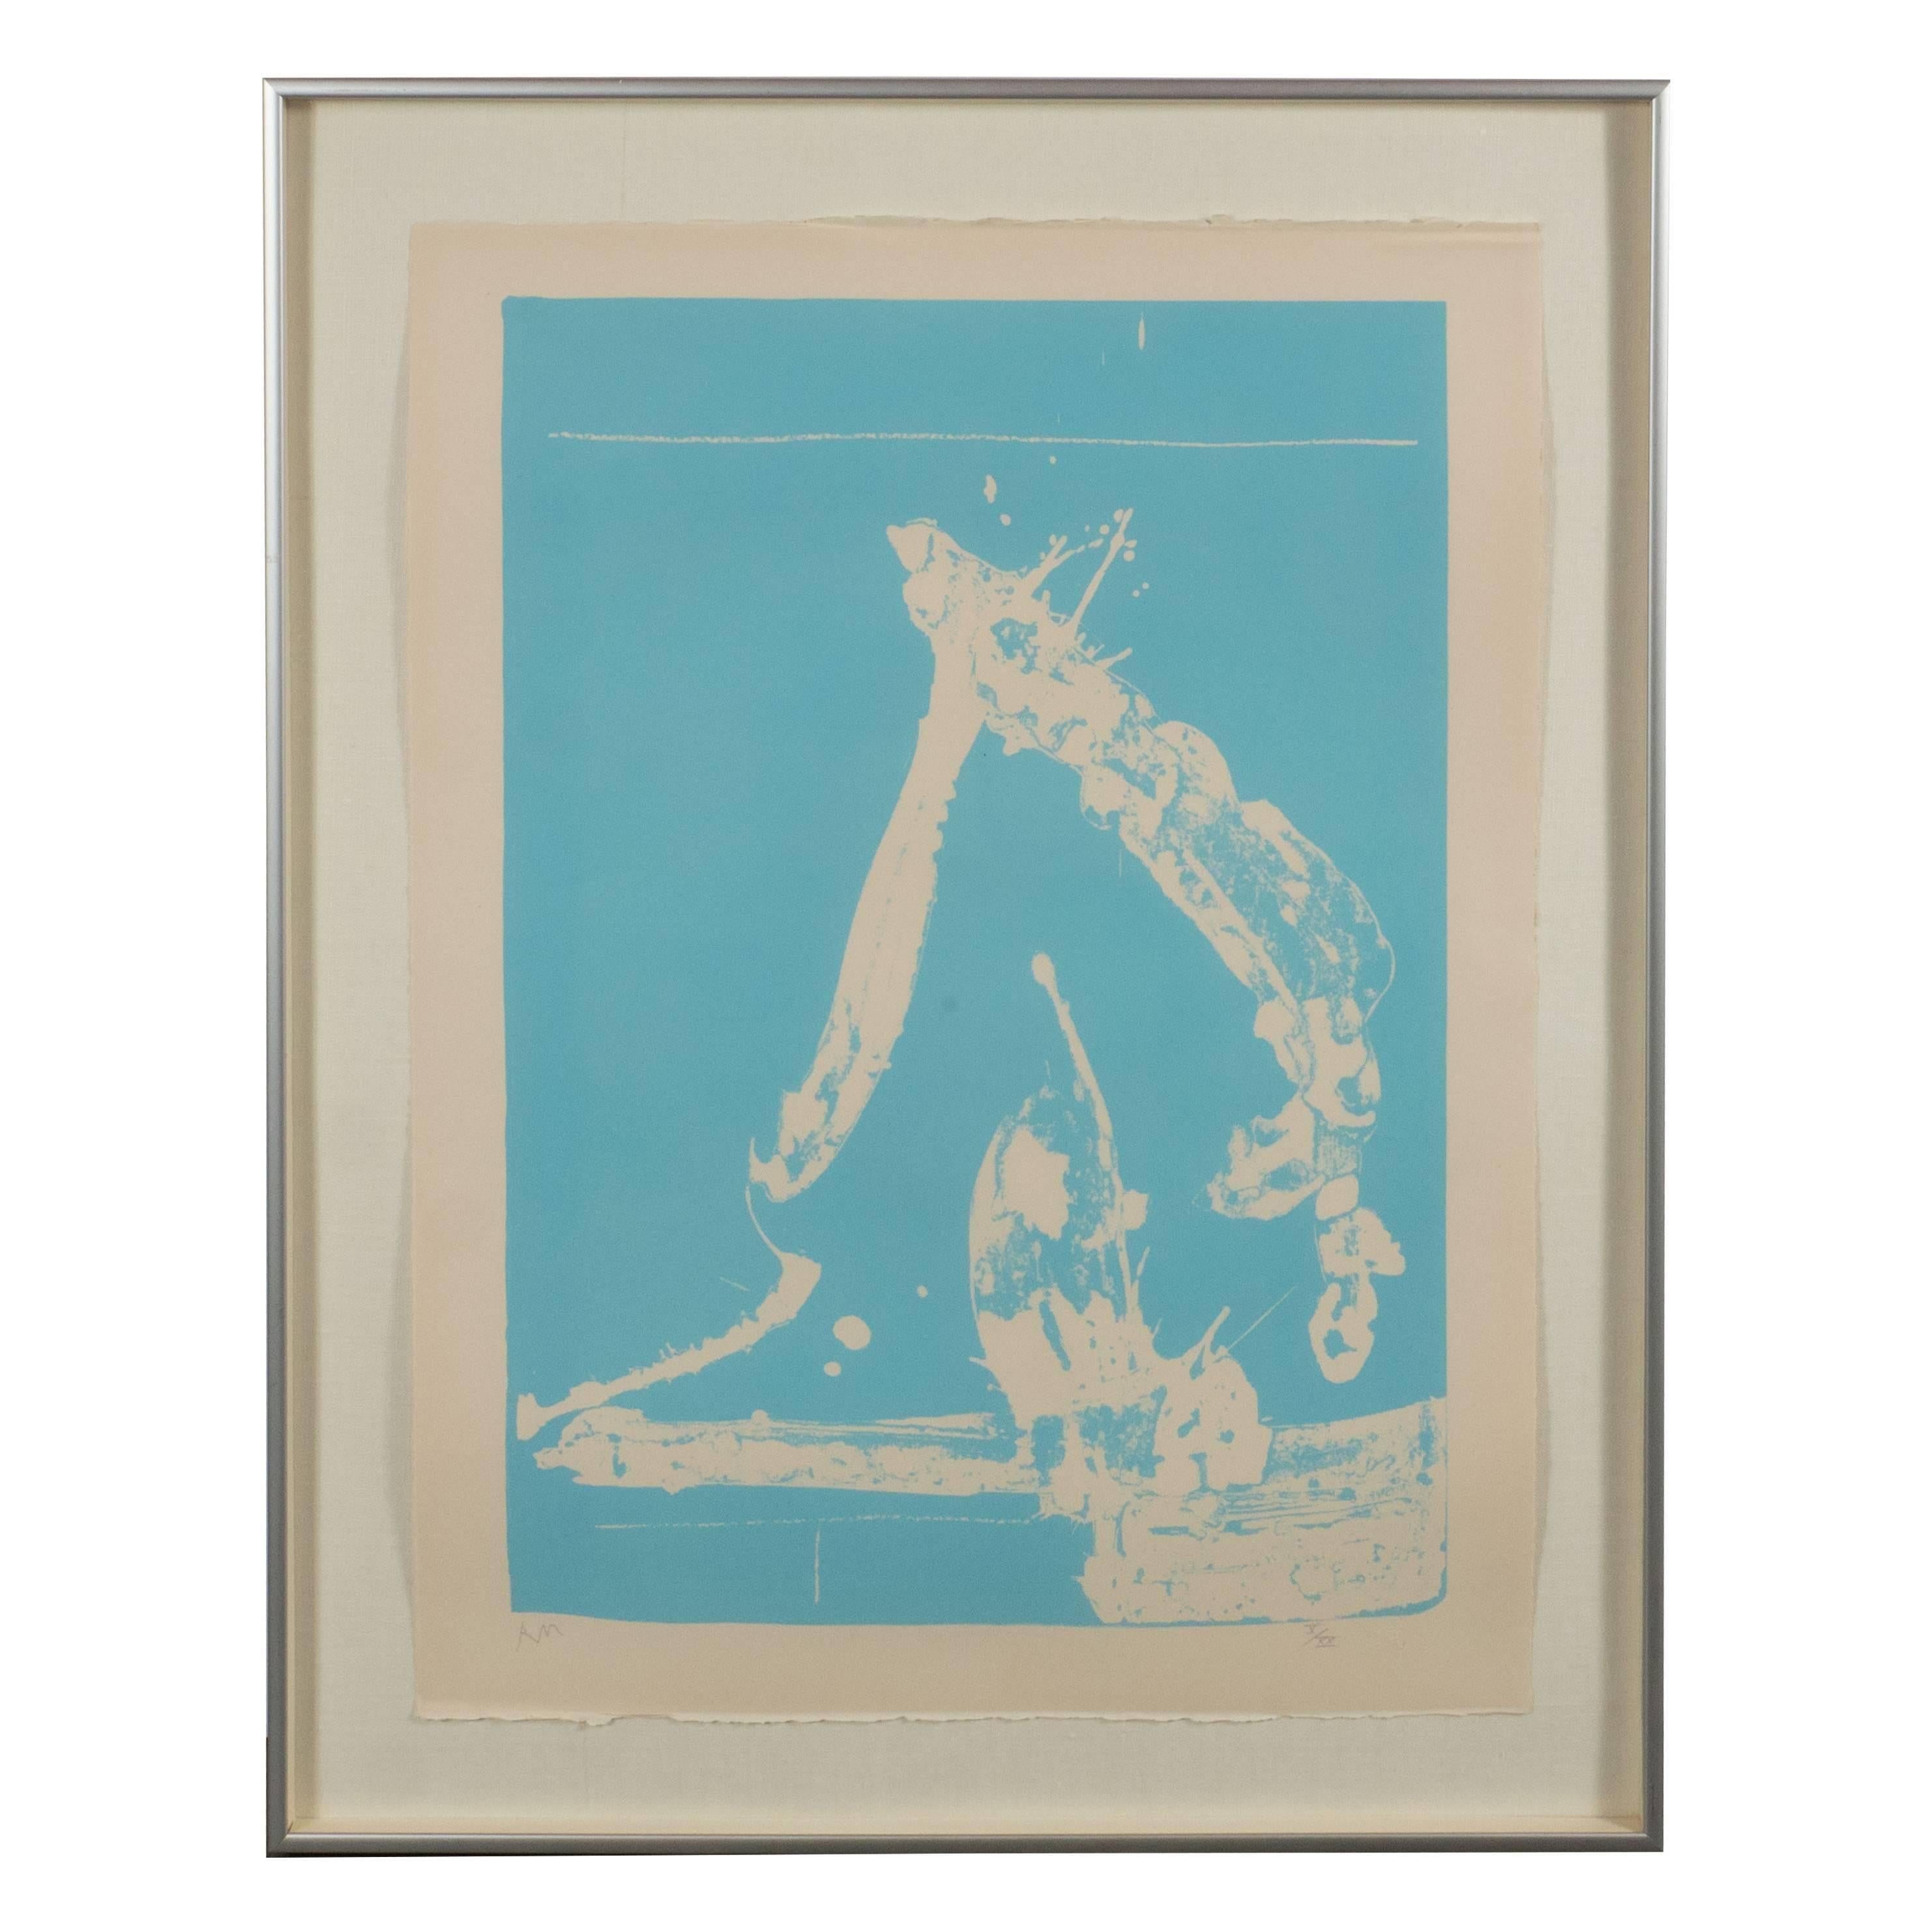 Robert Motherwell untitled abstract pale blue on white lithograph
9: Untitled (W.A.C. 56).
Lithograph printed in pale blue on white paper.
Initialed in penciel and numbered V/XX,
1966-1967.
In a simple chromed shadow-box type gallery frame.

From